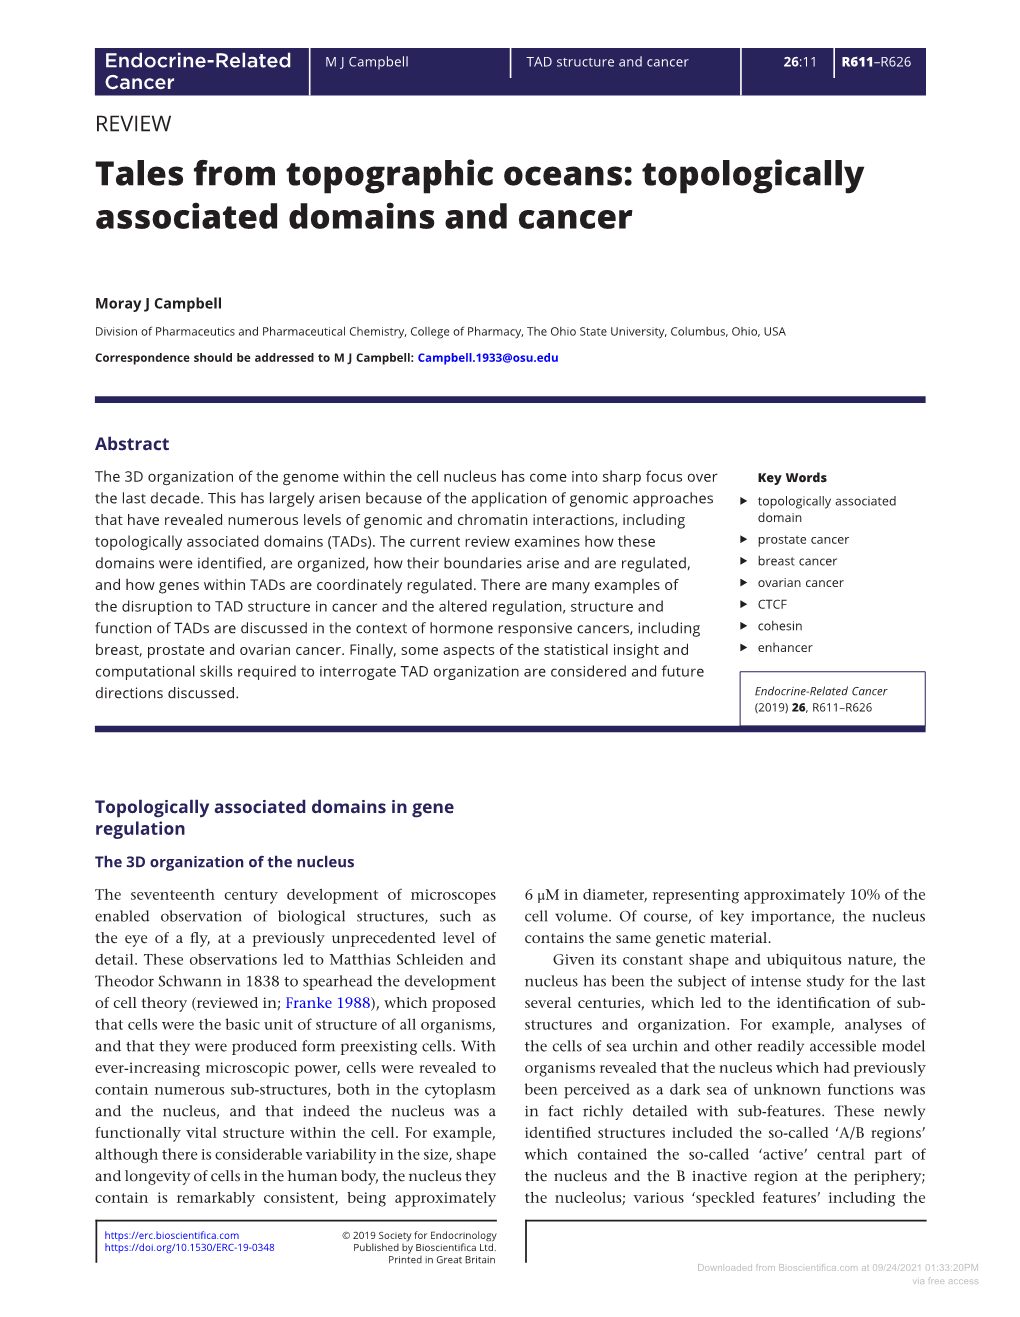 Tales from Topographic Oceans: Topologically Associated Domains and Cancer